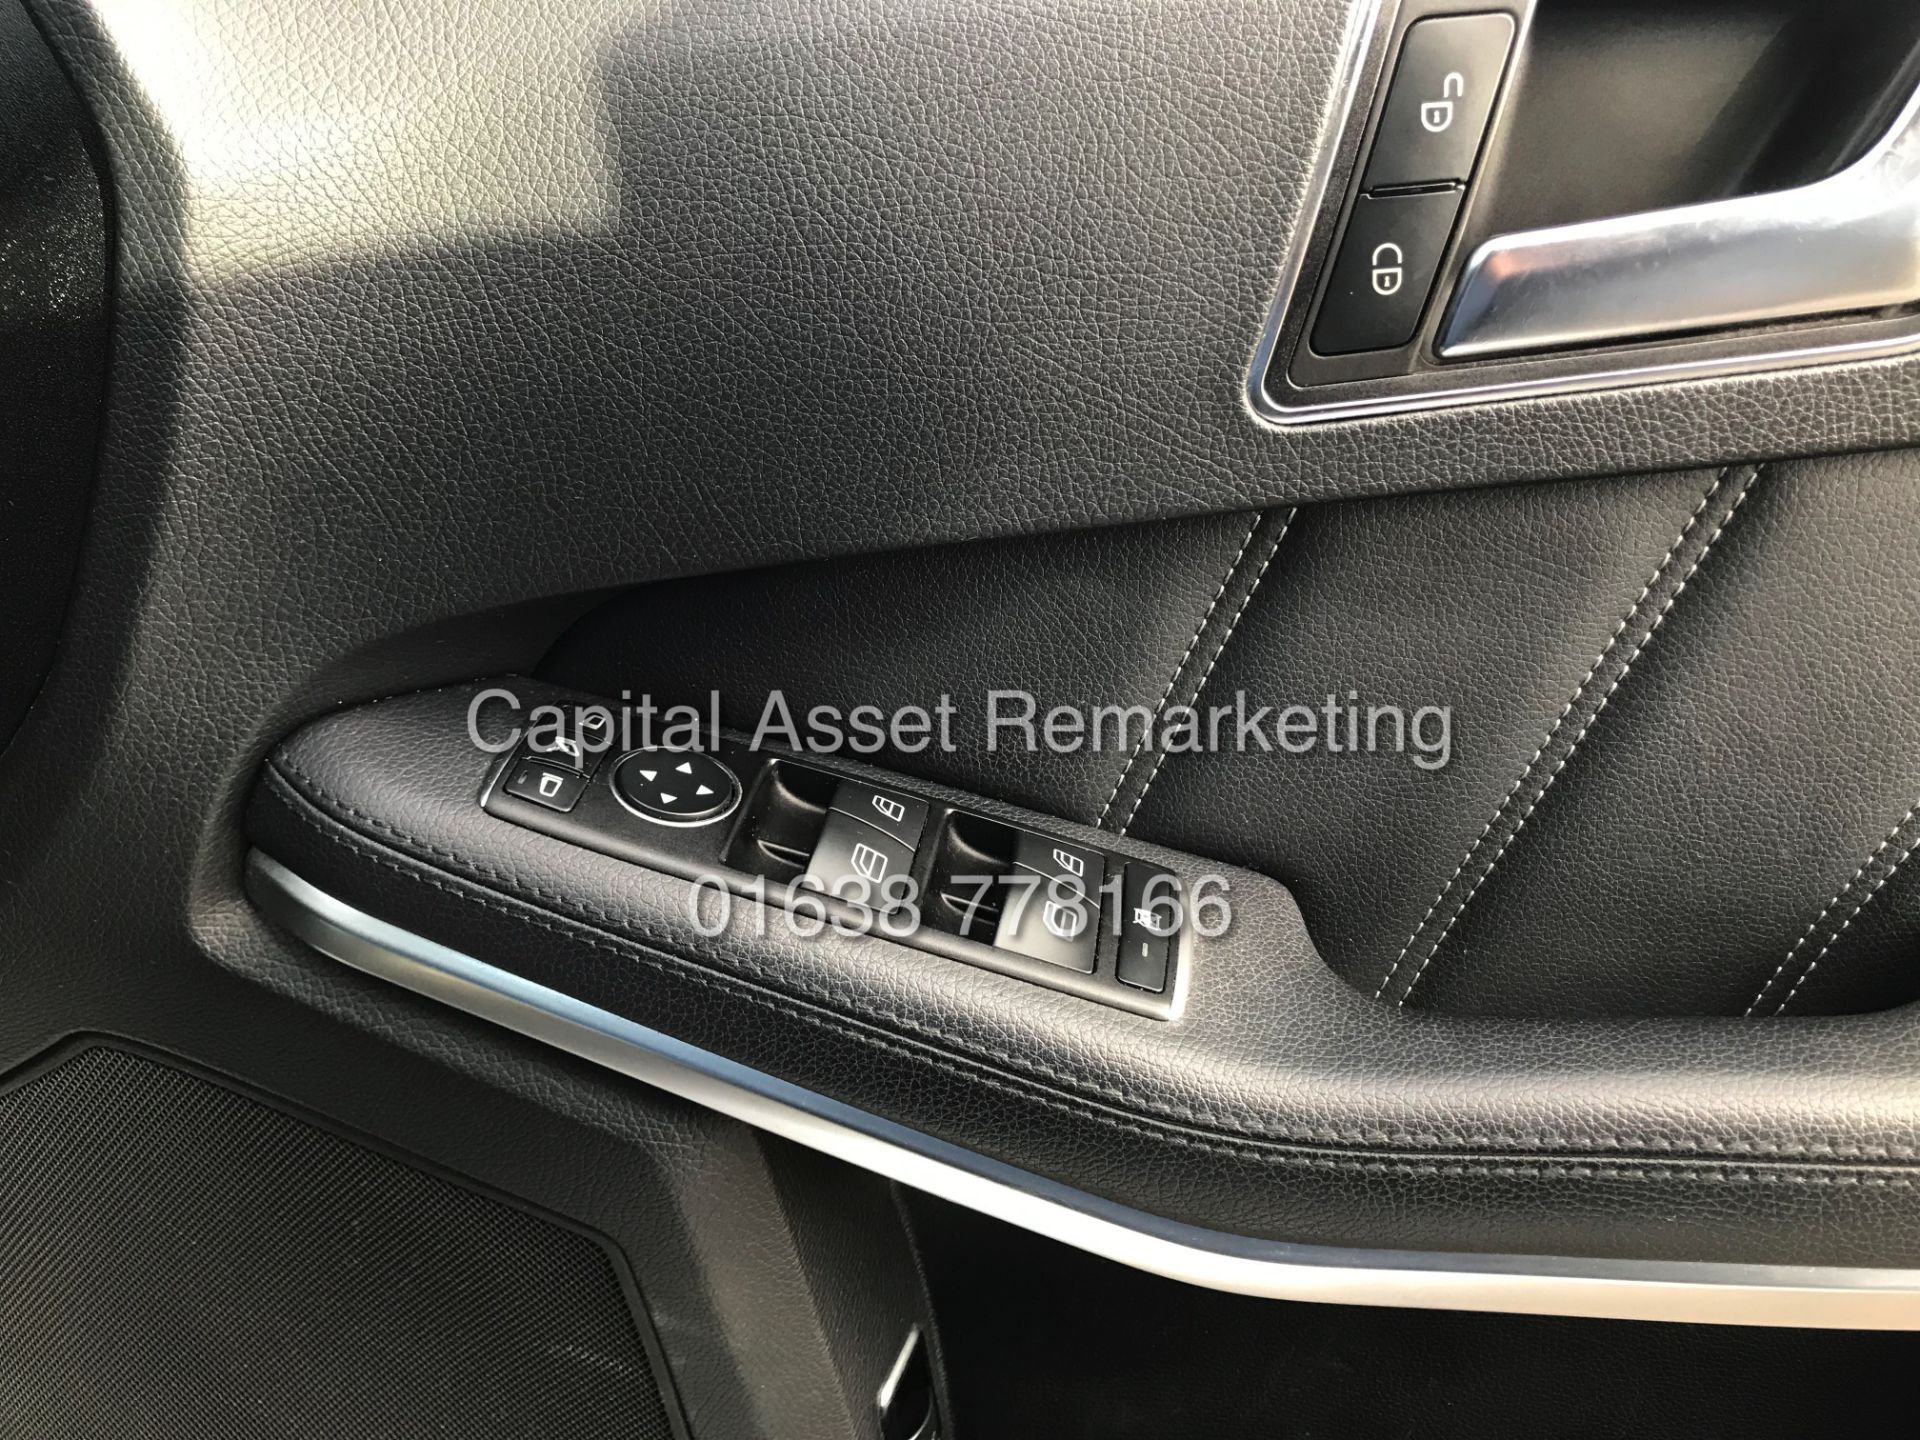 MERCEDES E220d "SPECIAL EQUIPMENT" 7G TRONIC AUTO (2015 MODEL) 1 OWNER - SAT NAV - LEATHER - Image 23 of 26